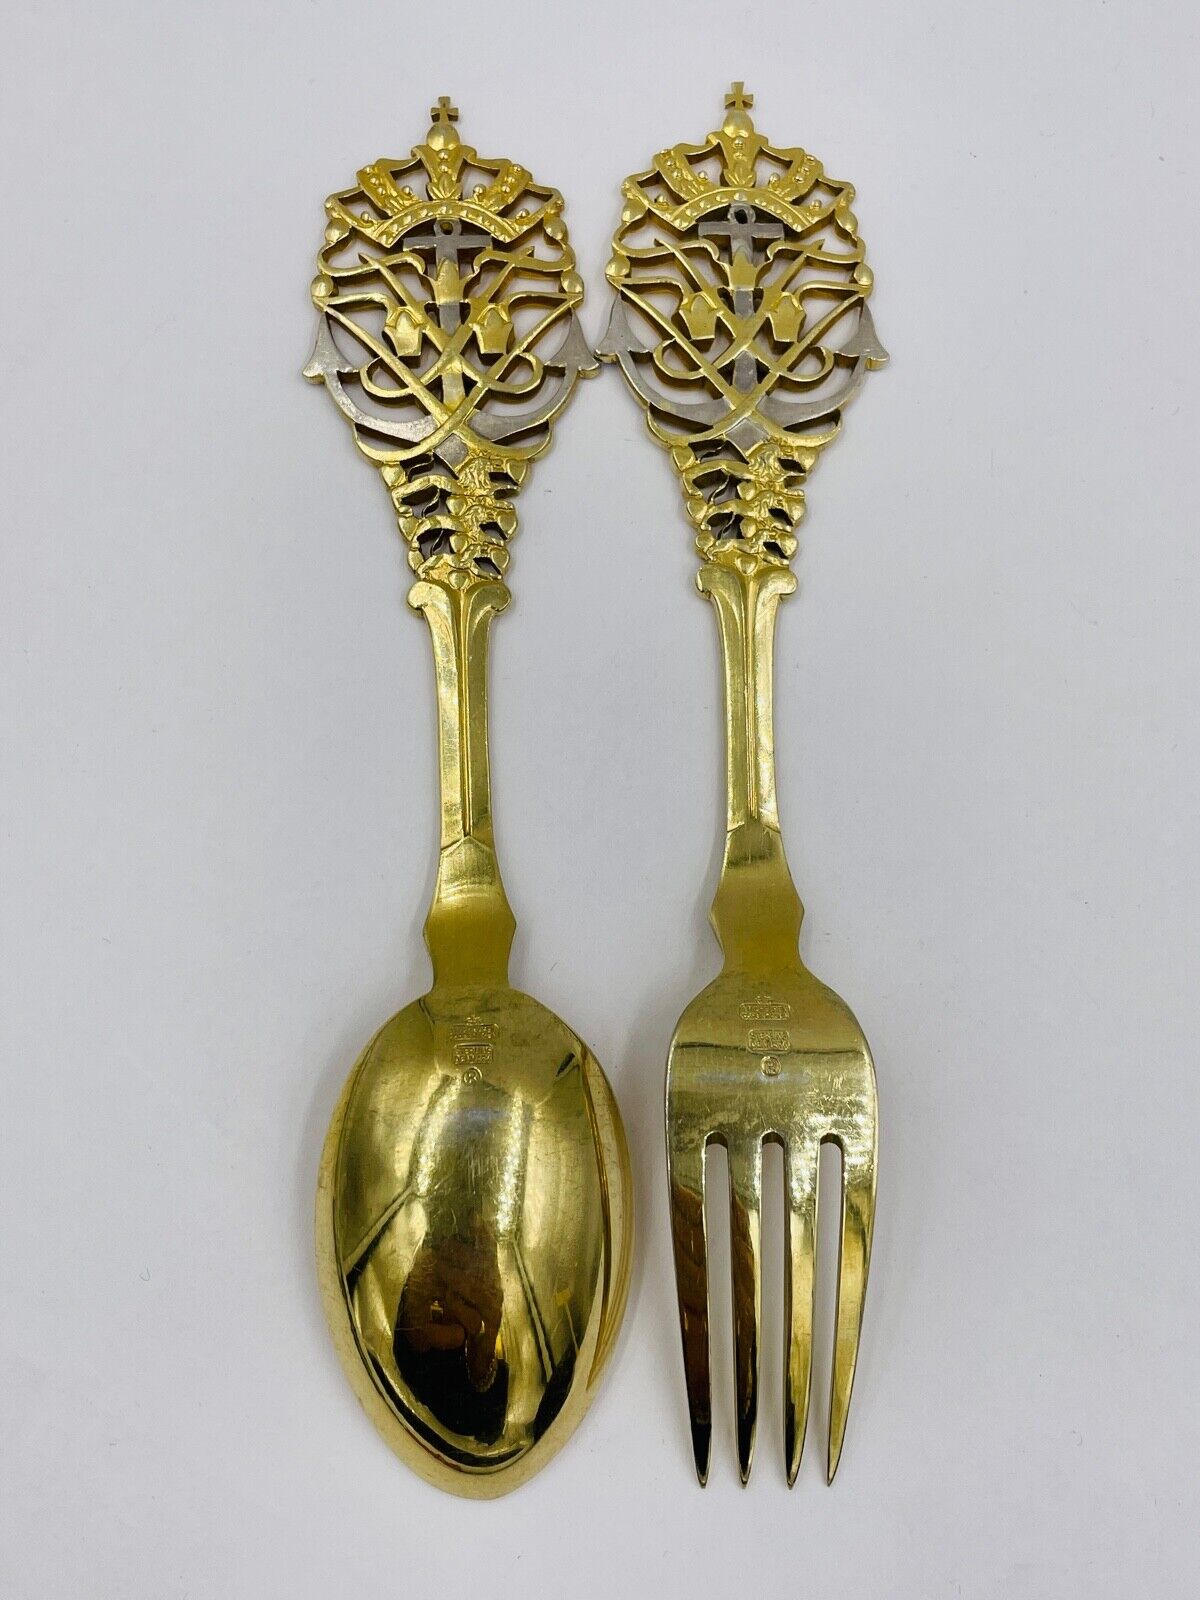 A. Michelsen commemorative fork and spoon set gilded Rare set 1935